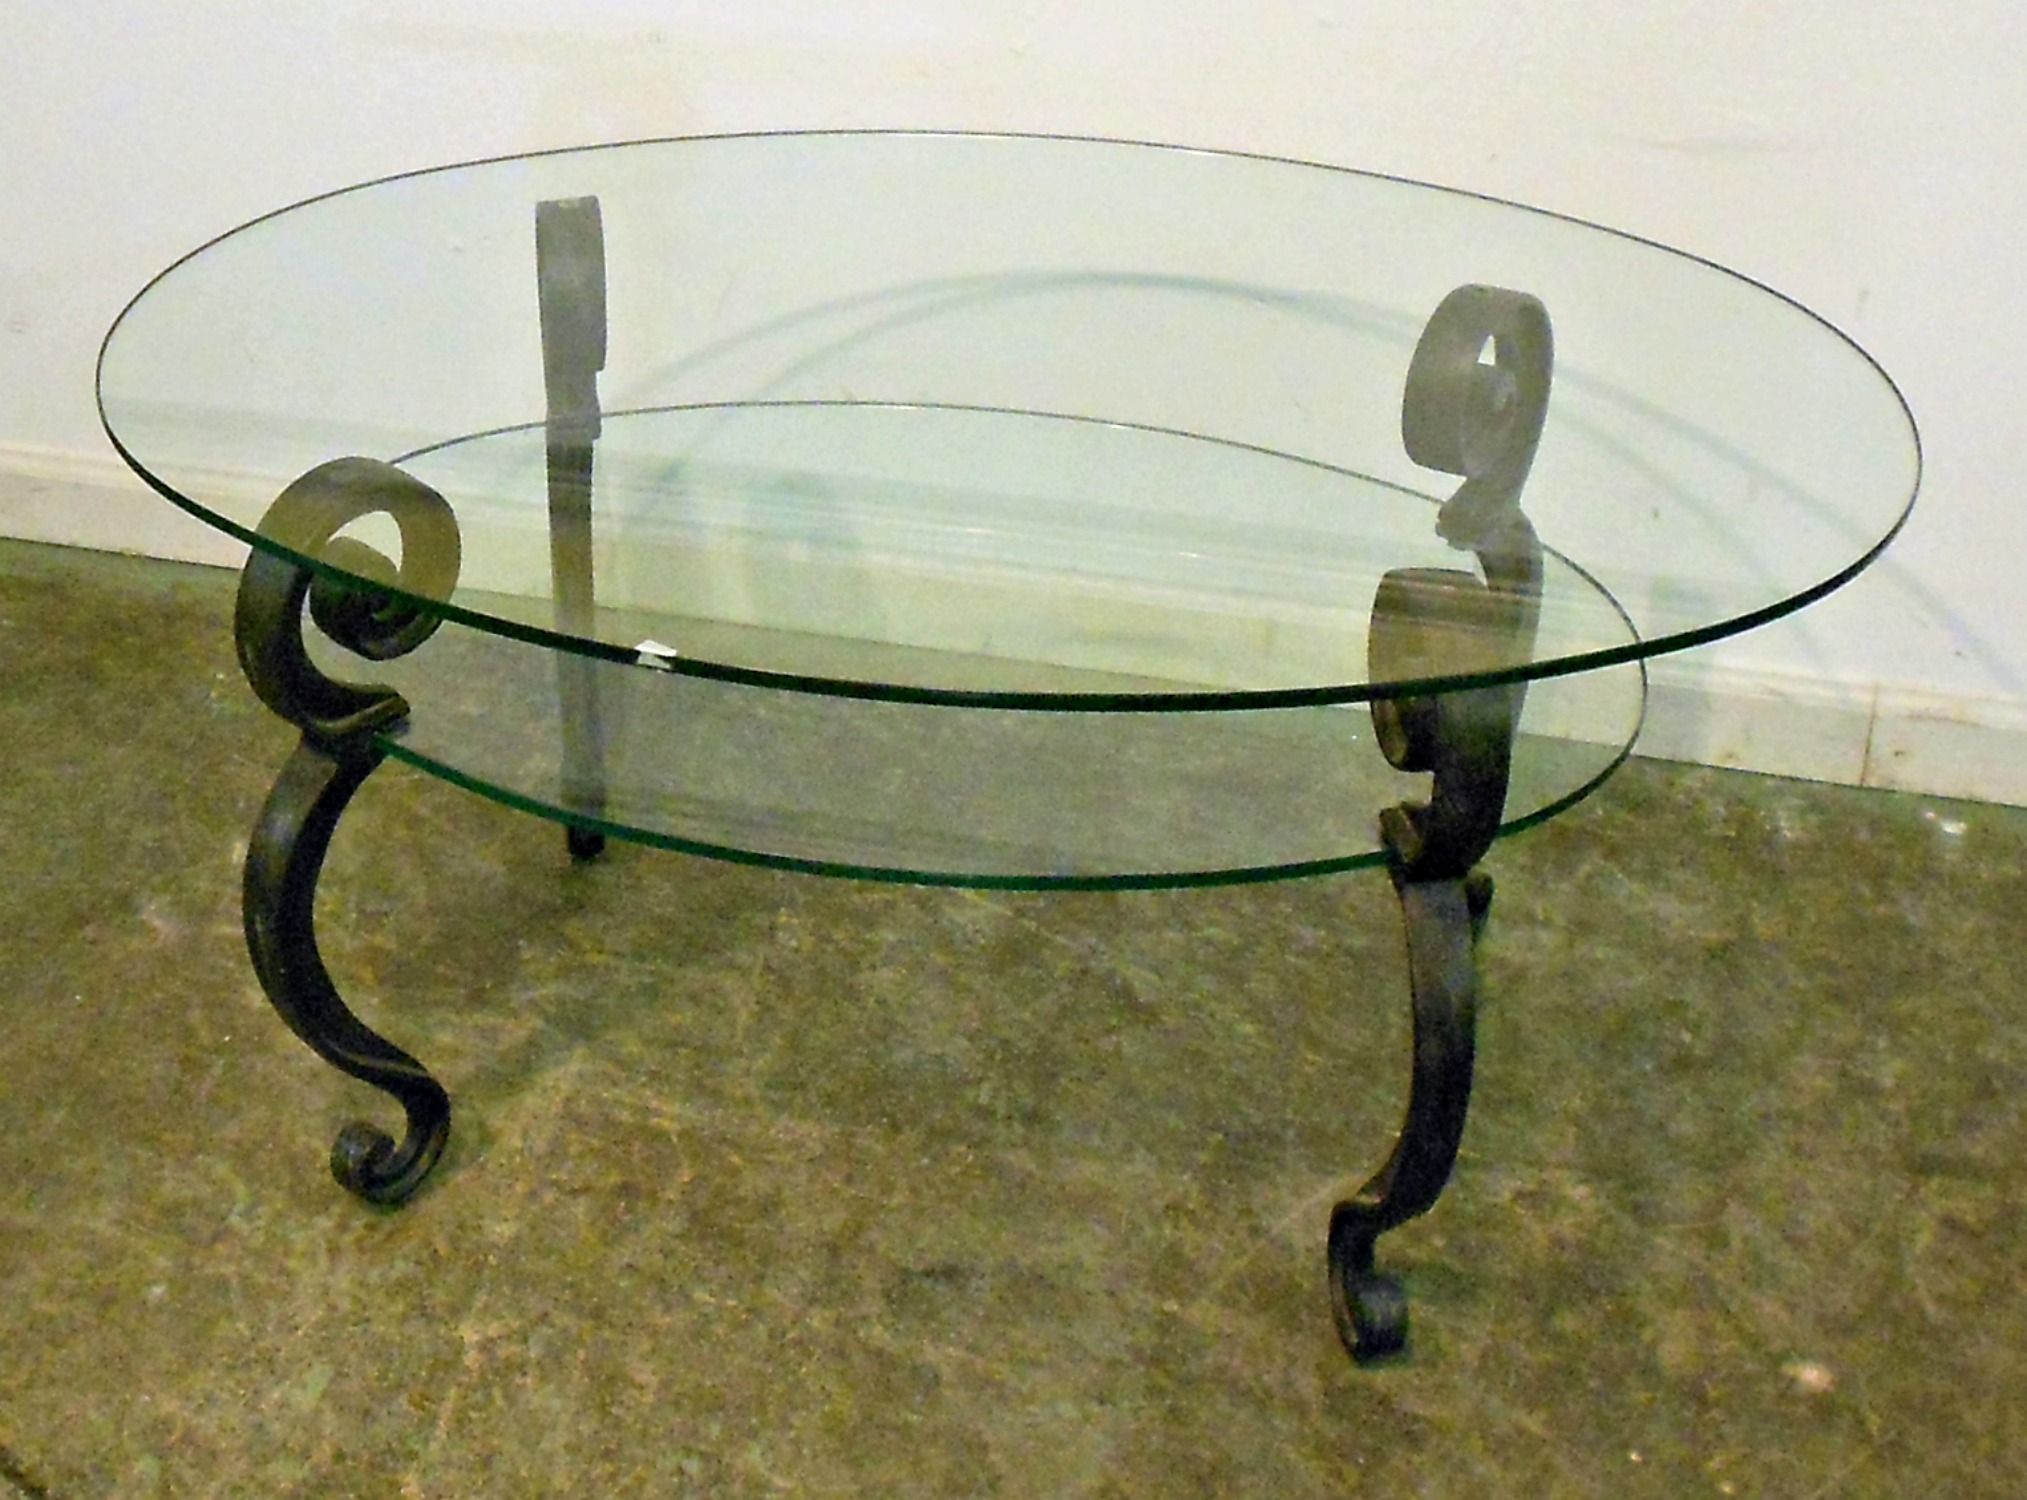 Glass Coffee Tables For Small Spaces One Trick You Can Use Is A Small Tables Mode The Round Table Would That Is Inherent Take Up Less Space From The Square (View 7 of 10)